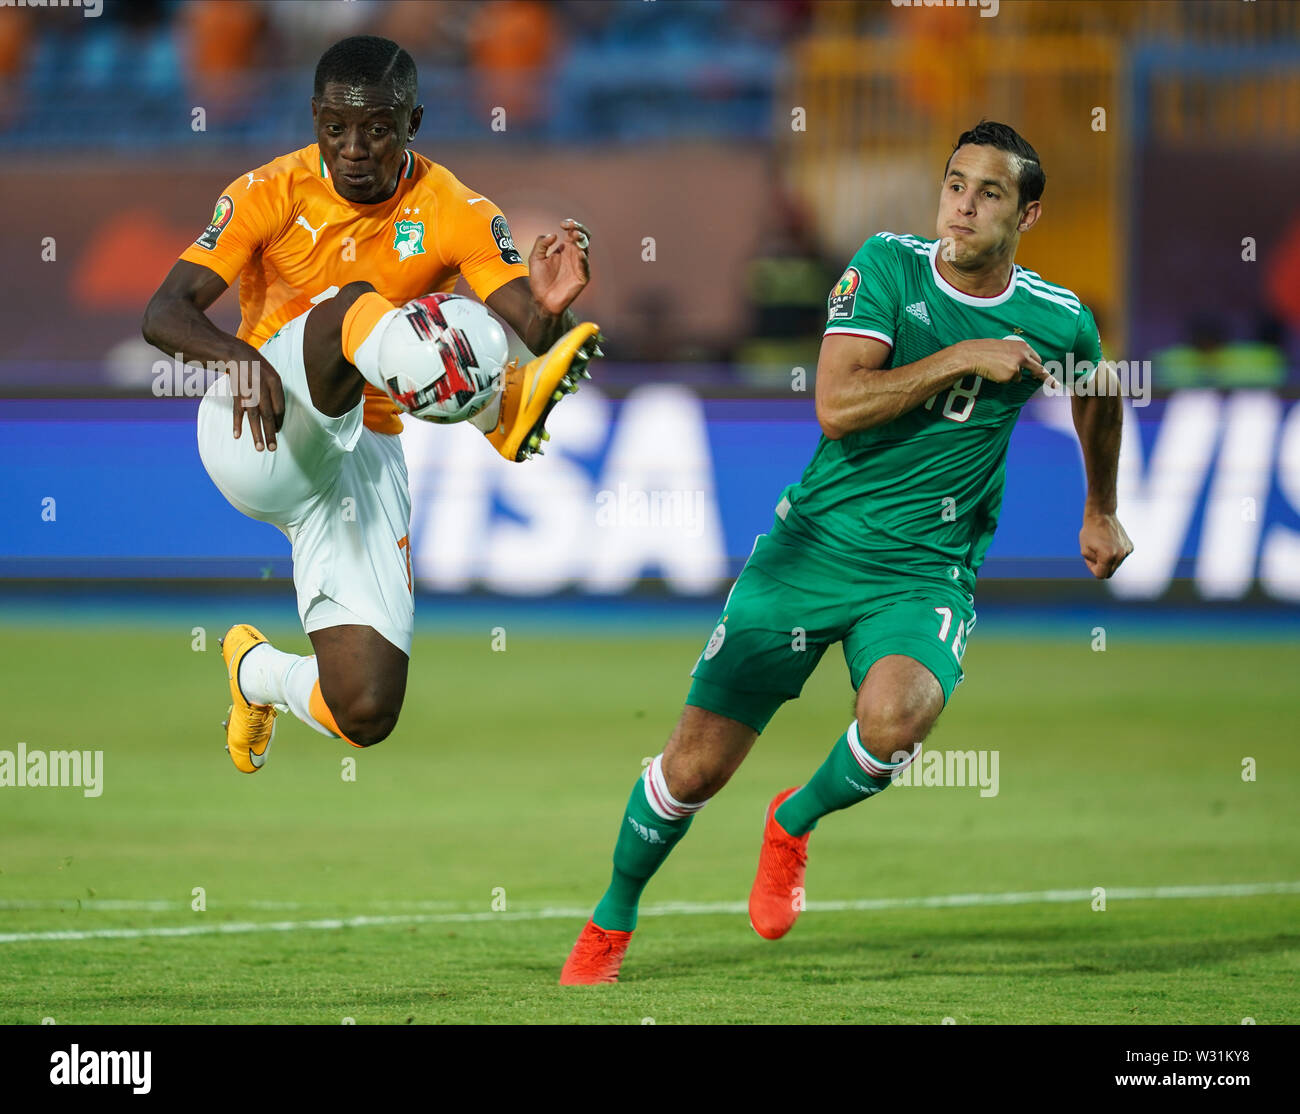 Suez, Egypt. 11th July, 2019. Ivory coast, Egypt - FRANCE OUT July 11, 2019: Max Alain Gradel of Cote D'ivoire and Mehdi Embareck Zeffane of Algeria during the 2019 African Cup of Nations match between Ivory coast and Algeria at the Suez Stadium in Suez, Egypt. Ulrik Pedersen/CSM/Alamy Live News Stock Photo